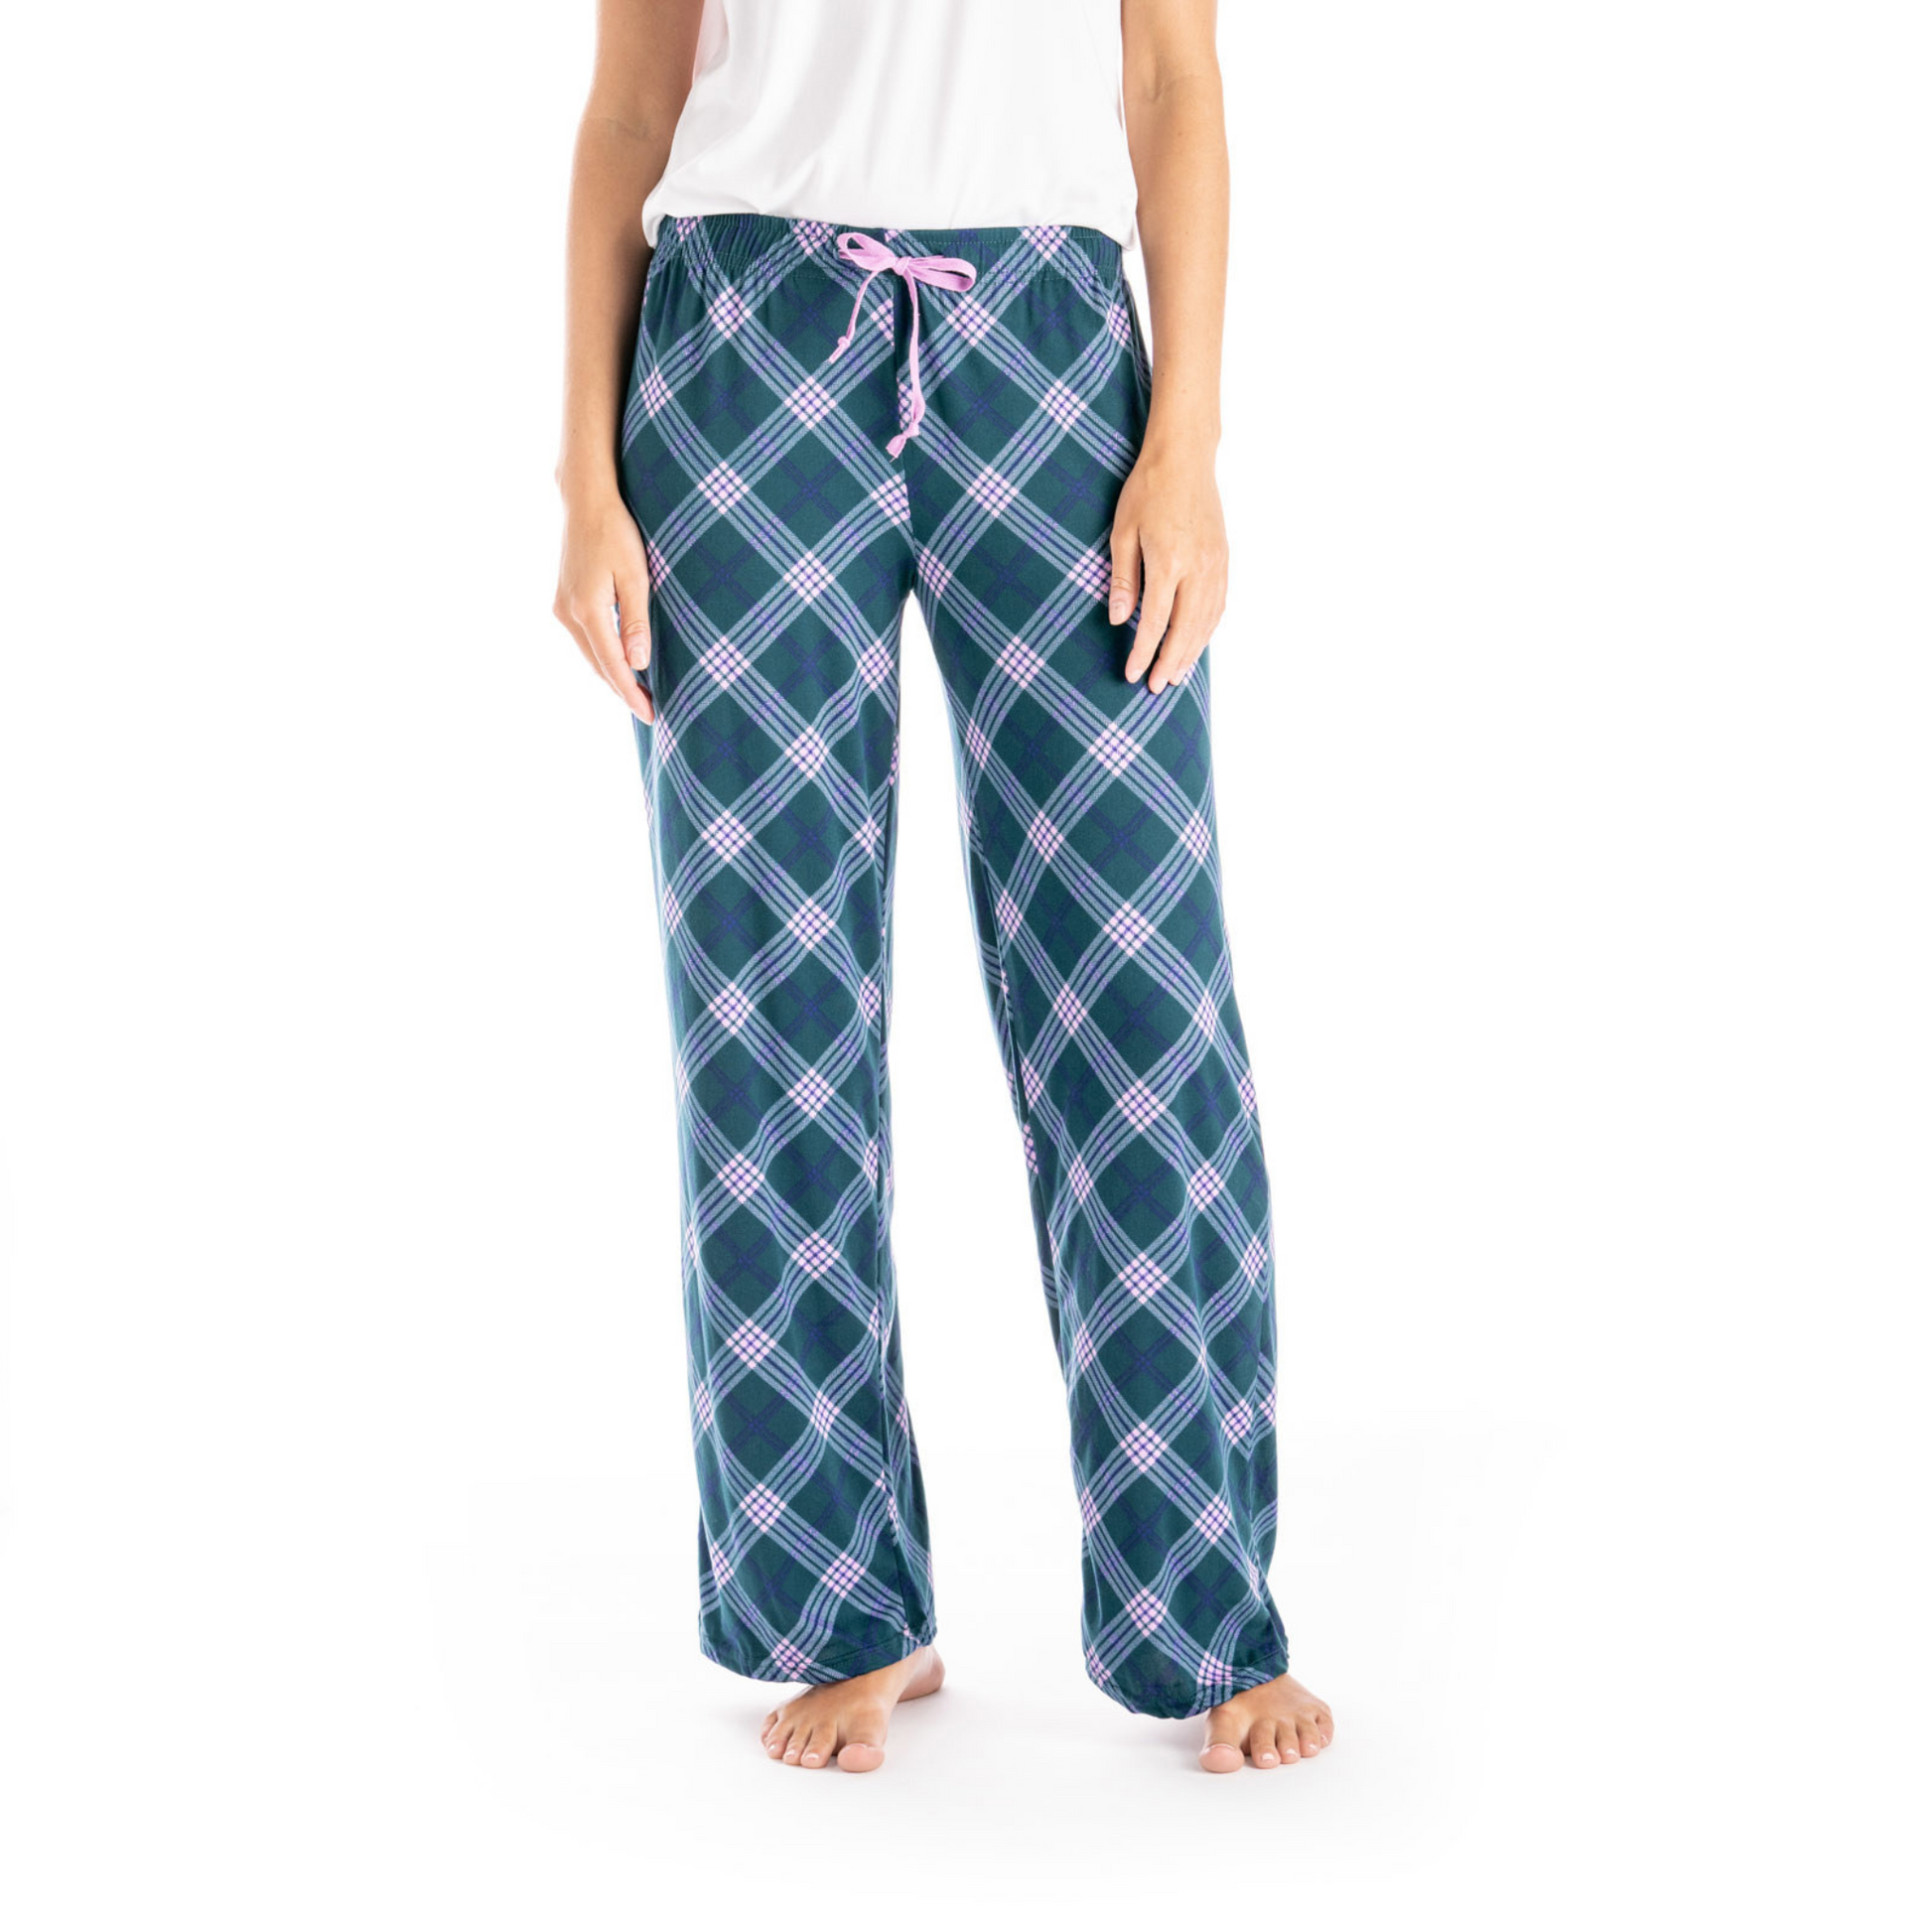 super soft pink and green plaid loungewear pants with drawstring 